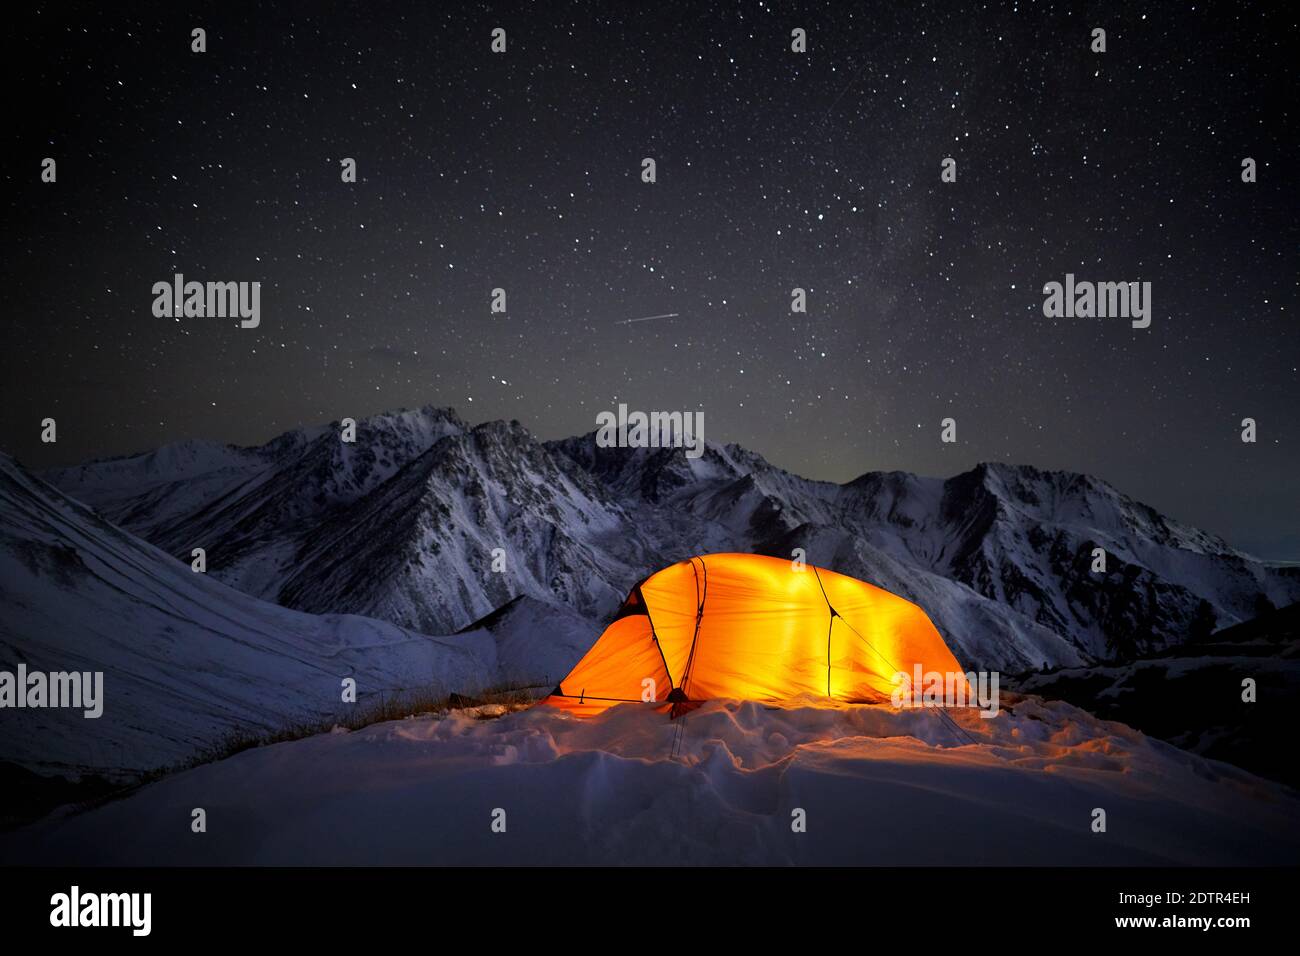 Glowing orange tent in the winter mountains at dark night sky background with shooting star Stock Photo